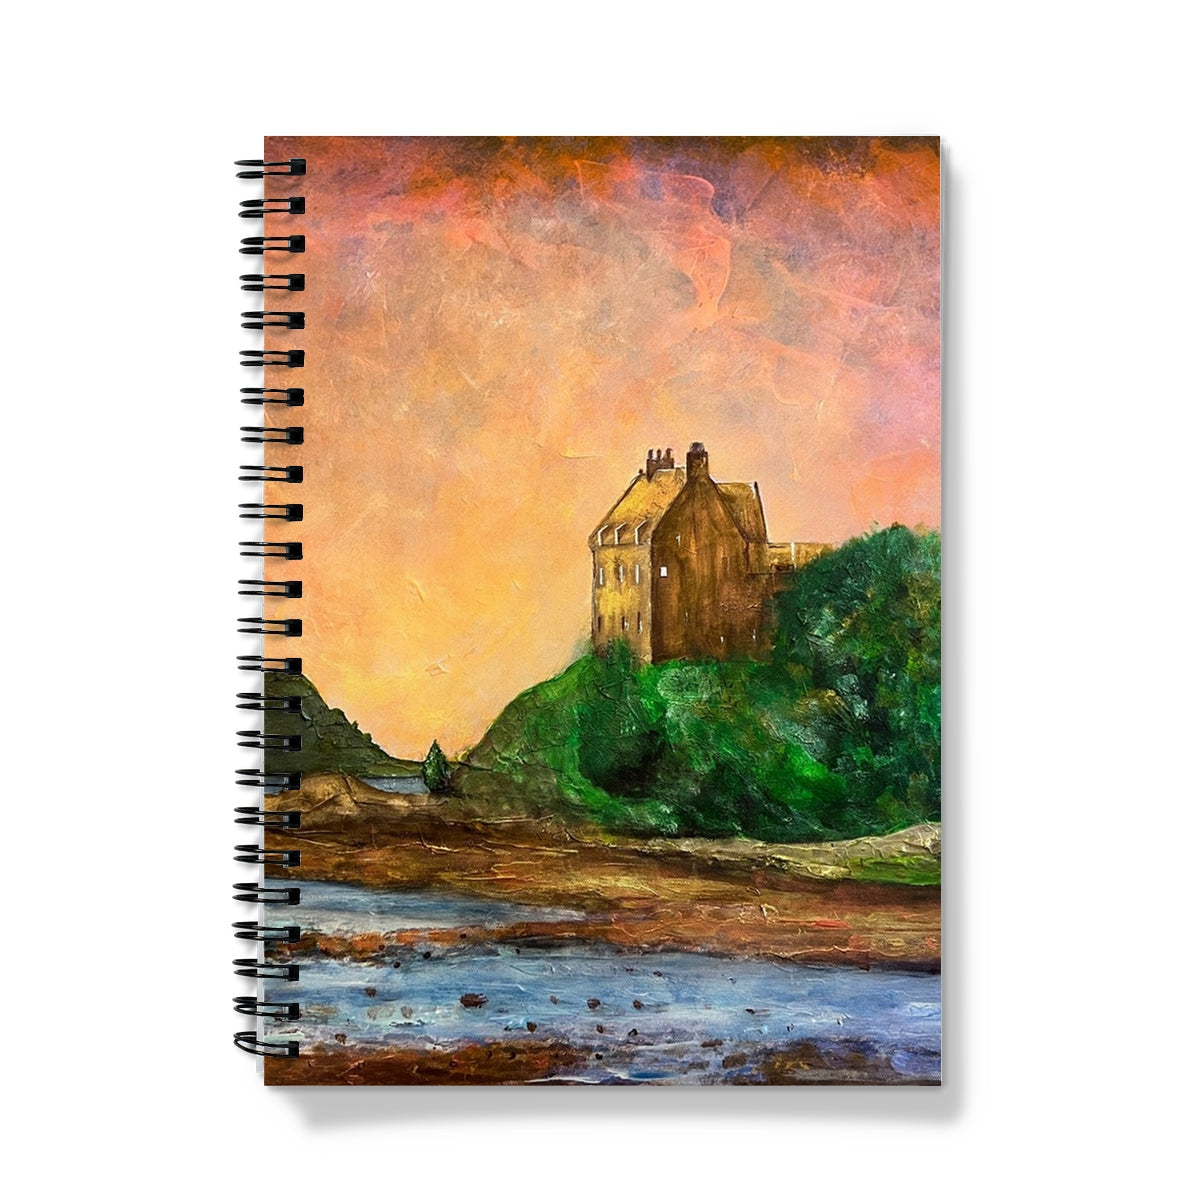 Duntrune Castle Art Gifts Notebook-Journals & Notebooks-Historic & Iconic Scotland Art Gallery-A5-Lined-Paintings, Prints, Homeware, Art Gifts From Scotland By Scottish Artist Kevin Hunter